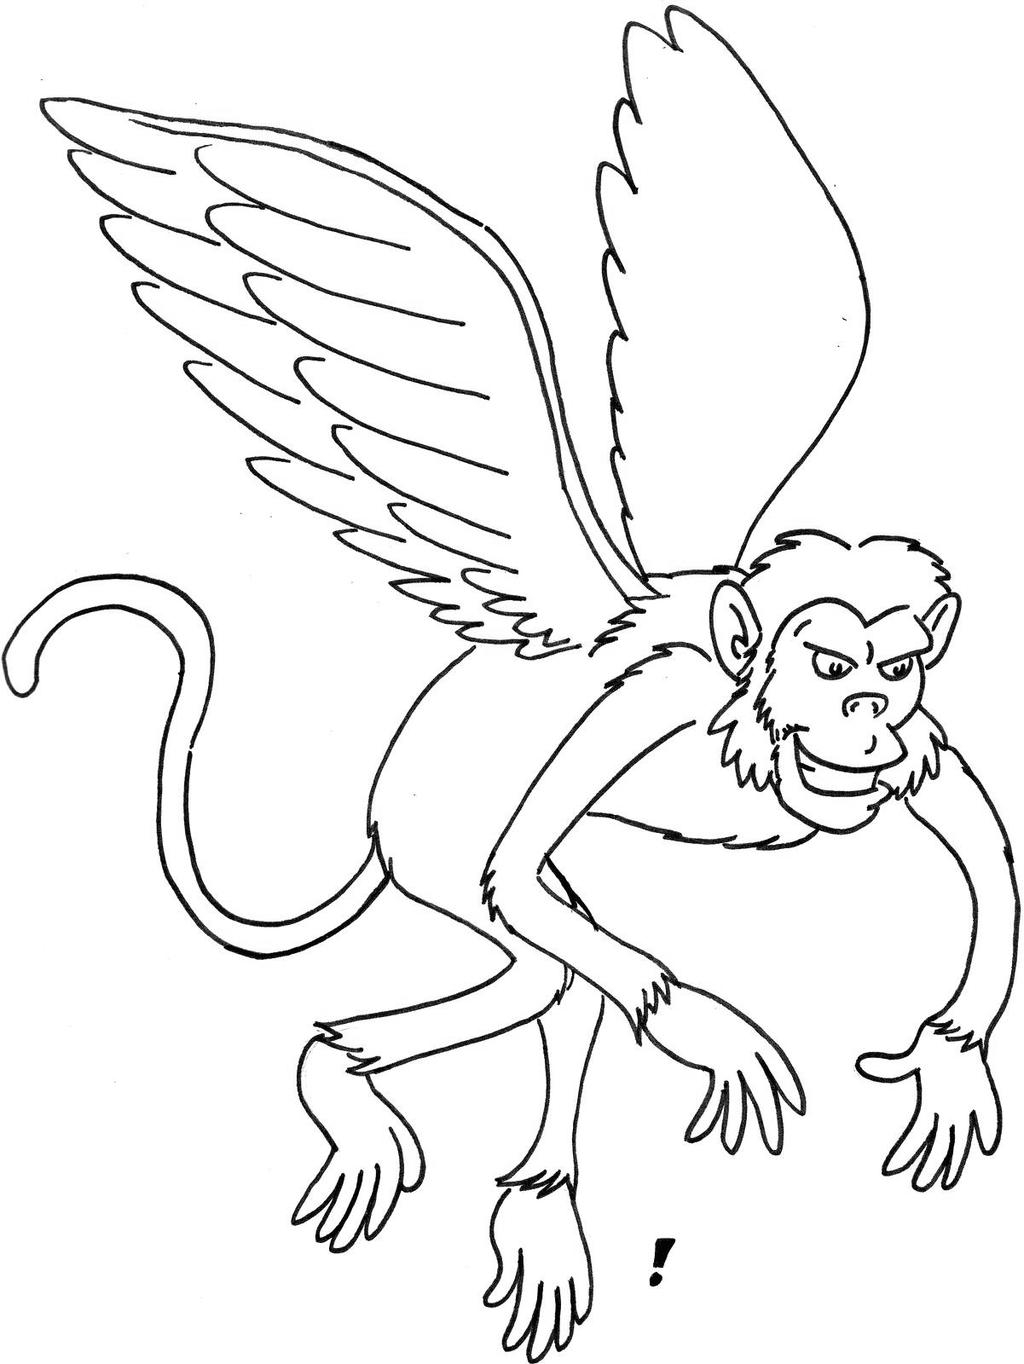 Wizard Of Oz Printable Coloring Pages Wizard Of Oz Coloring Pages Flying Monkey Free Printable Coloring